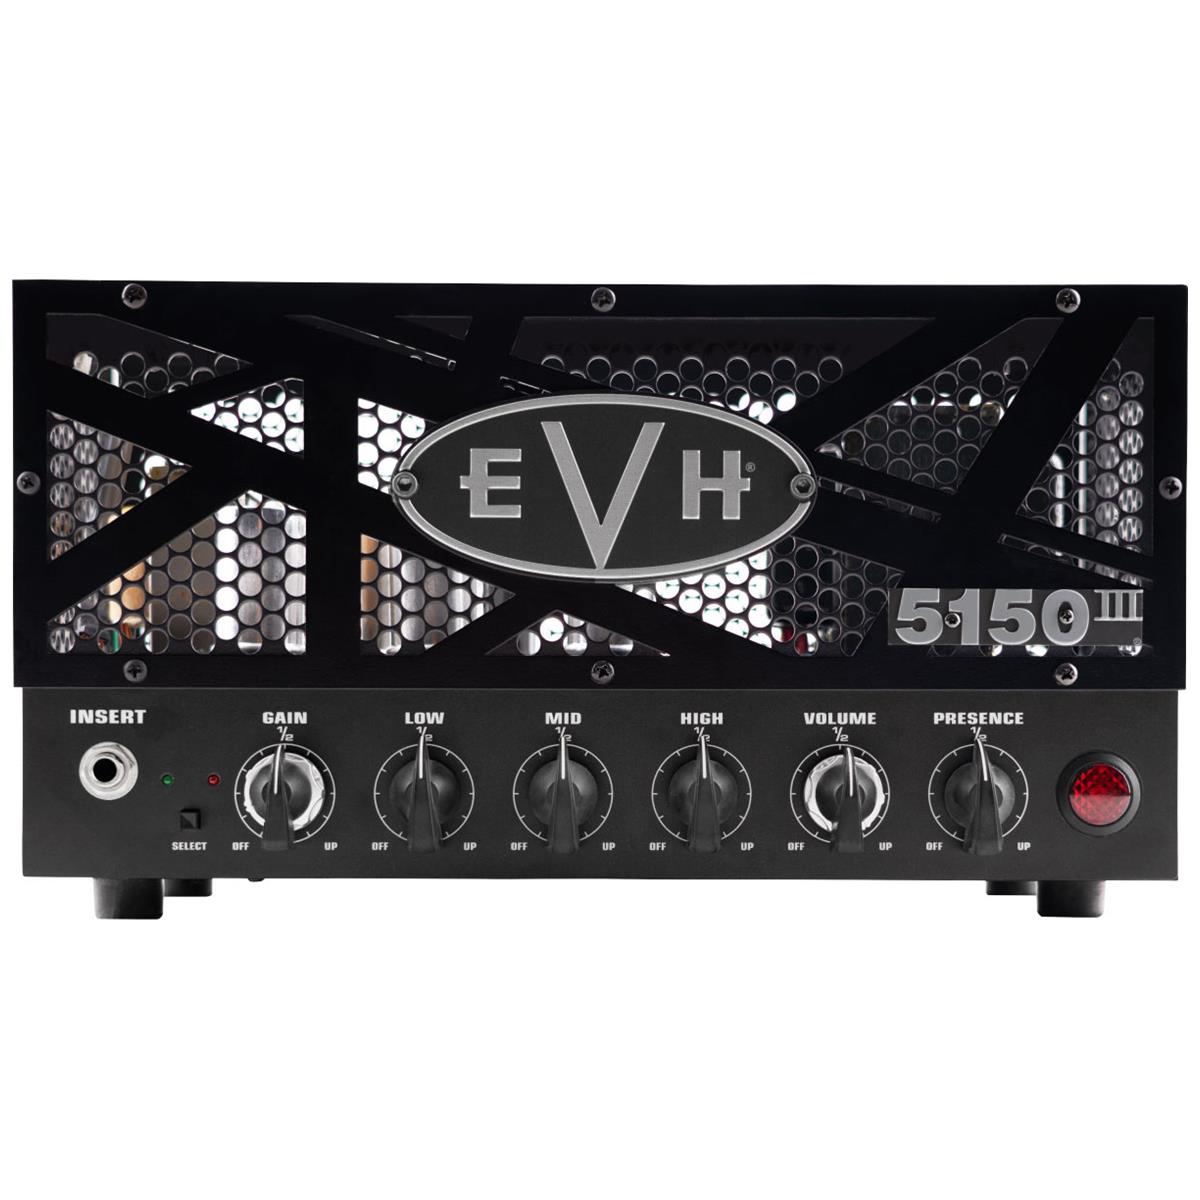 EVH 5150III 15W LBX-S 2-Channel Amp Head The EVH 5150III 15W LBX-S Head packs legendary tone into a diminutive 15-watt amp.A crossbreed between the LBXI and the LBXII, the seductively dark stealth LBX-S blends the Green "clean" channel with the Red "full burn" channel for a sonically diverse soundscape - from pristine cleans that soar to that sizzling modern Brit sound with high-gain attitude.Armed with four JJ ECC83S (12AX7) preamp tubes and two JJ EL84 power tubes, this easy-to-carry lunchbox head also includes dual-concentric gain and volume controls for precise and independent control of each channel, as well as shared EQ presence and resonance controls.Dial in a crystal clean tone or turn the gain up for a bluesier counterpart on the Green channel, and hit the one-button footswitch to select the Red channel for a no-nonsense, scorching overdriven tone that sets leads ablaze with sustain for days.Bedroom players can utilize the 1/4-power switch to reduce the head to 3.5 watts and avoid disturbing the rest of the household, while studio and live musicians can leverage this same feature to turn up the head for a squeezed and spongy tone. This amp is also equipped with dual parallel speaker output jacks, effects loop and one-button footswitch.Boasting exceptional construction, fierce tone and distinctive style, the wildly fun LBX-S Head features a black front panel and black metal grill cage with the Stealth EVH-striped motif. Unique to the LBX-S, this head also has internal LED backlighting that illuminates the cage in either green or red to match the selected channel. And just like all Stealth models, the LBX-S has been modded to include an adjustable bias control port.<b>Crystal Cleans And Blistering Bite</b>This pint-sized, easily-portable head packs Eddie's legendary tone and attitude with two distinct channels. The Green channel sings with pristine and sparkling cleans or even punchy gain for bluesy vibes, while the Red channel revs things up with modern liquid gain and scorching overdriven tone that's ideal for blistering leads.<b>Light It Up</b>Added style points come in the form of an LED backlight, which illuminates the cage in either green or red to match the selected channel.<b>Crank It!</b>Bedroom players can utilize the 1/4-power switch to reduce the head to 3.5 watts and avoid disturbing the rest of the household, while studio and live musicians can leverage this same feature to turn up the head for a squeezed and spongy tone.The LBX-S also has dual gain and volume controls for independent control of each channel and level matching, as well as shared EQ presence and resonance controls.<b>Sound On The Go</b>Four JJ ECC83S (12AX7) preamp tubes up the ante with plenty of saturated, high-gain tone synonymous with Van Halen's high-powered sound when pushed to the brink. Two JJ EL84 power tubes produce Eddie's tonal attitude with a modern twist, delivering distinguished harmonics similar to early British-style tube amps.<b>Tap of The Foot</b>Toggling from the Clean (Ch. 1) to Full Burn (Ch. 2) is just a mere tap of your foot away with the 1-button footswitch.